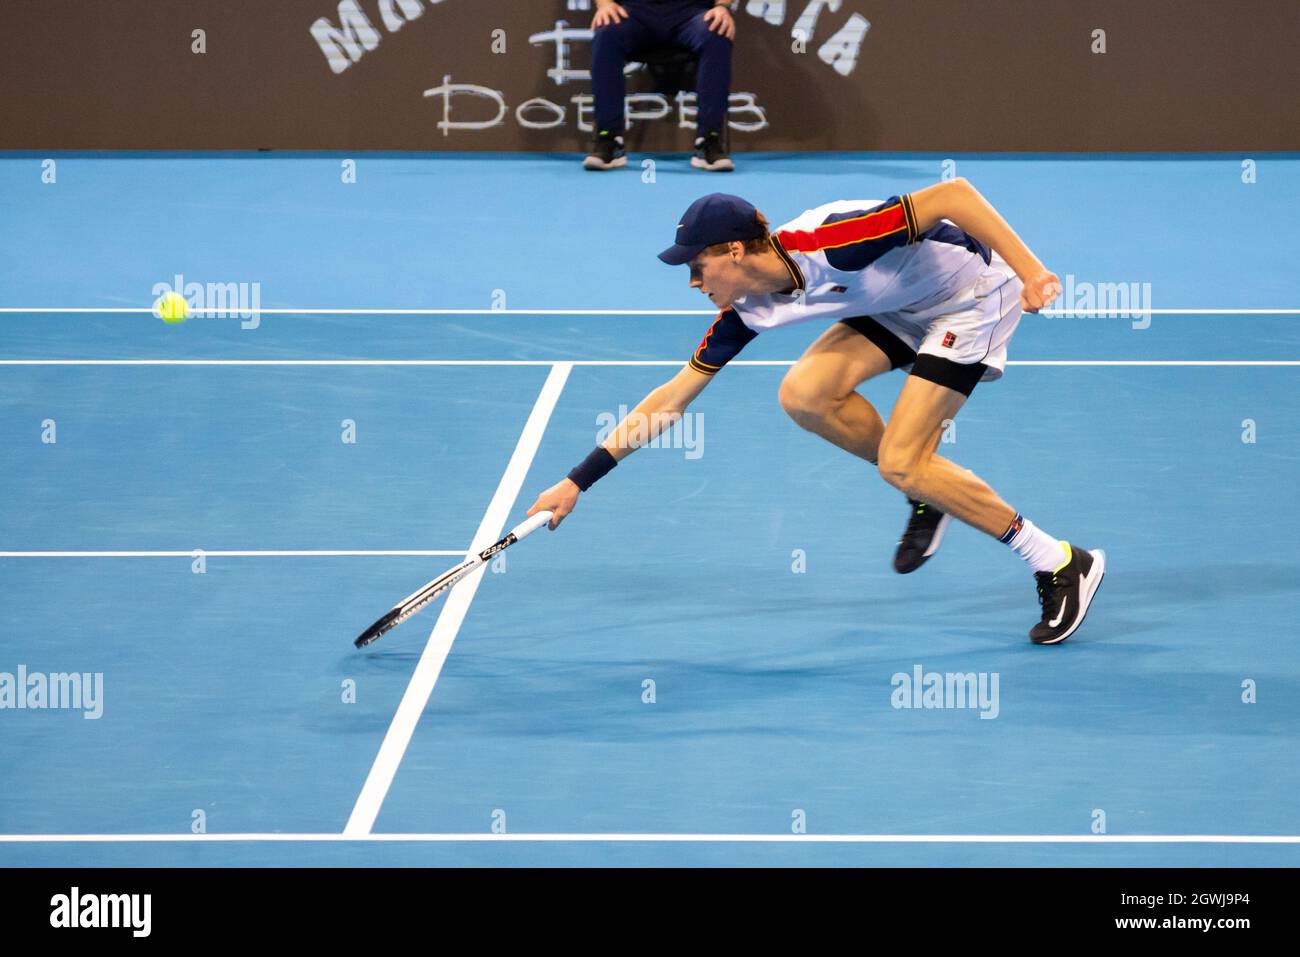 Sofia, Bulgaria. 03 October 2021. Jannik Sinner of Italy in action against Gael Monfils of France during the men's singles final of the Sofia Open 2021 ATP 250 indoor tennis tournament on hard courts. Credit: Ognyan Yosifov/Alamy Live News Stock Photo